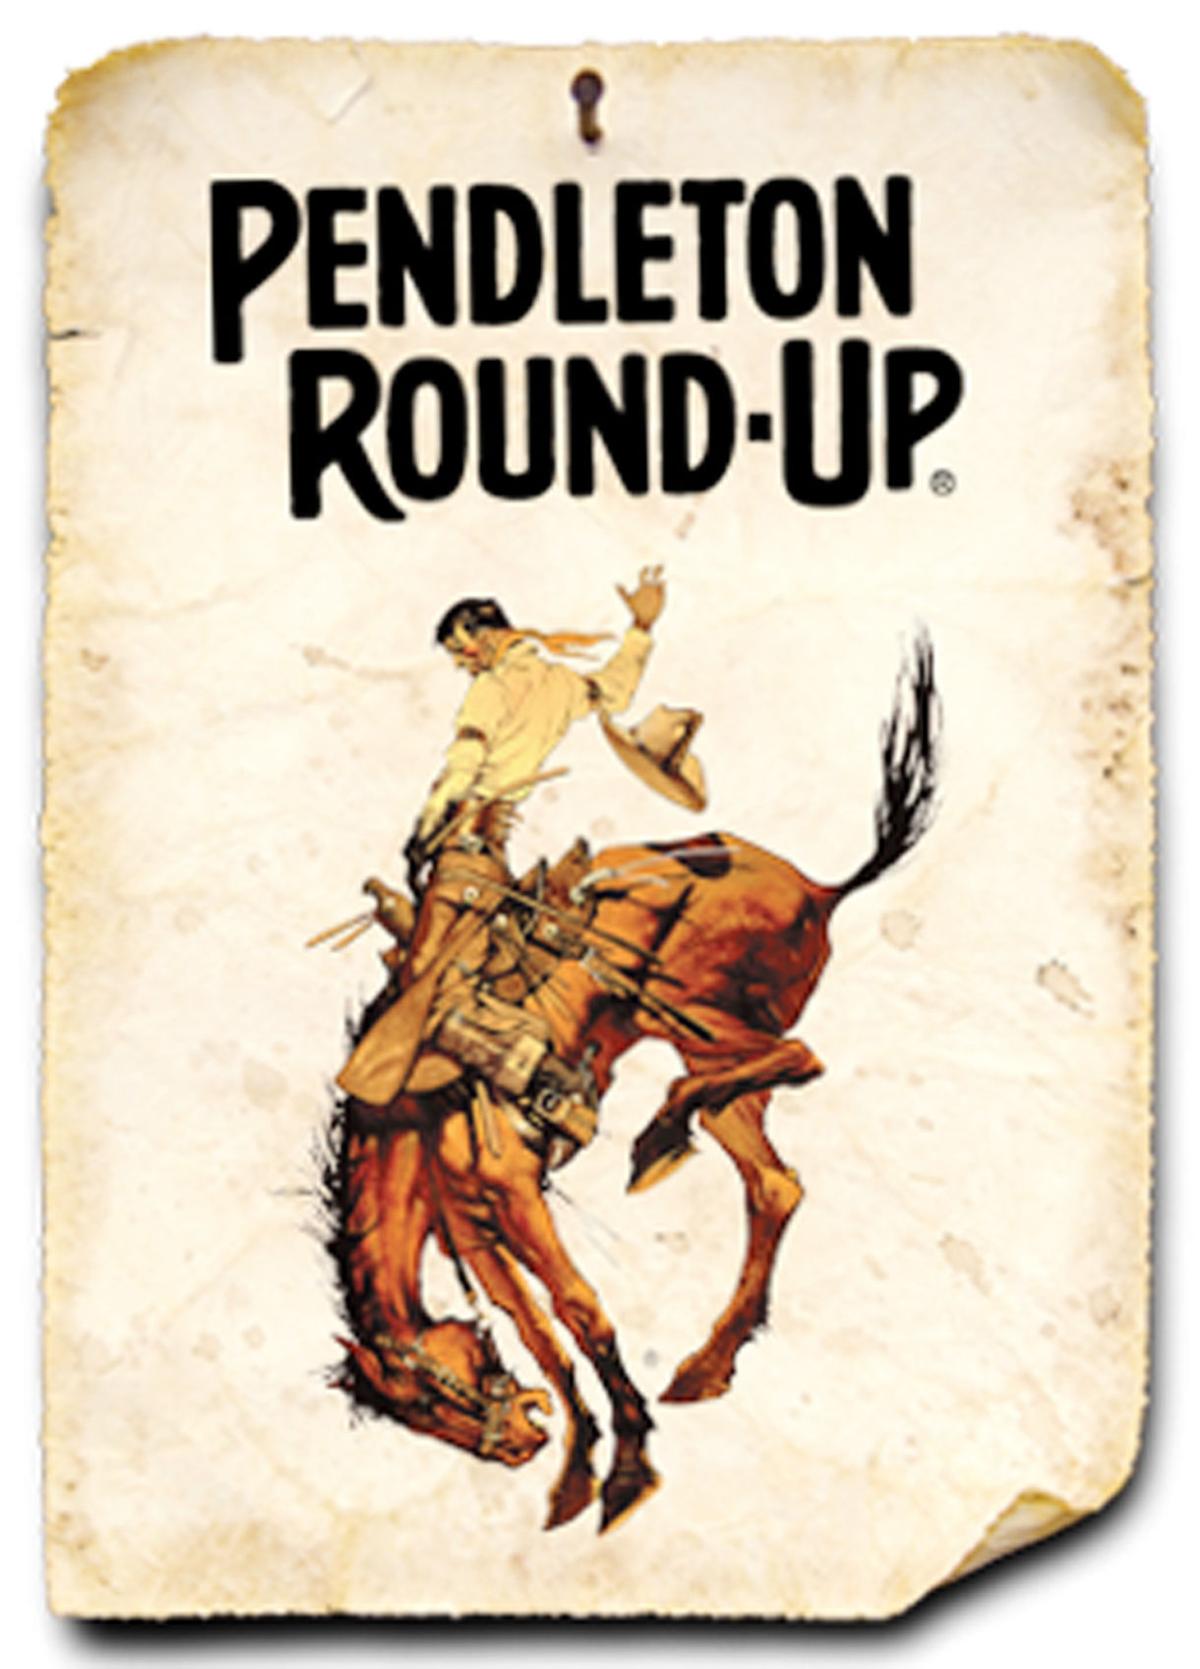 New Pendleton RoundUp court crowned Etcetera